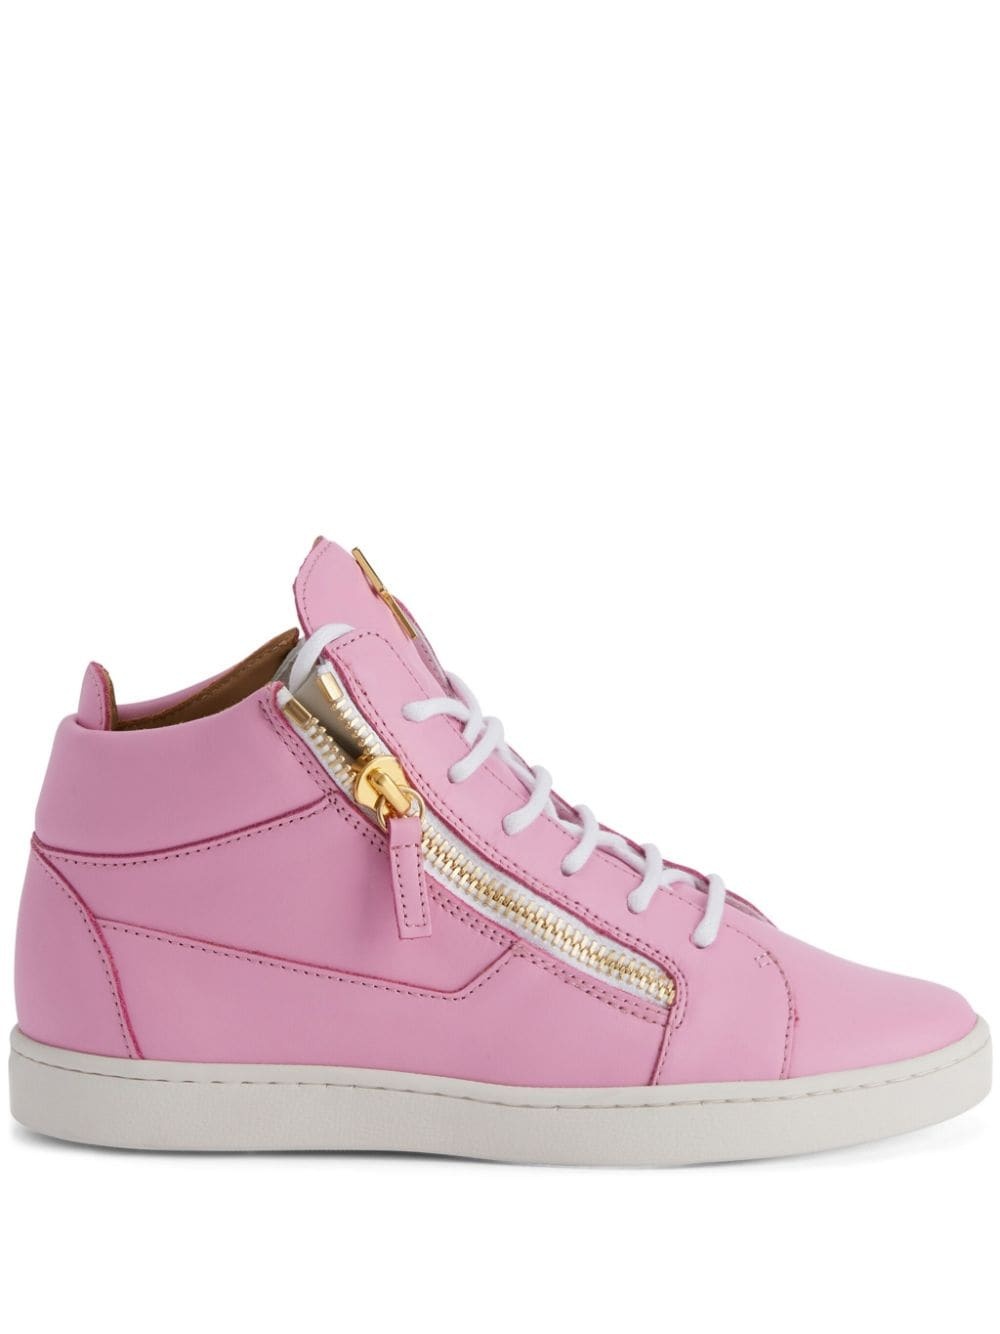 Kriss leather sneakers - 1